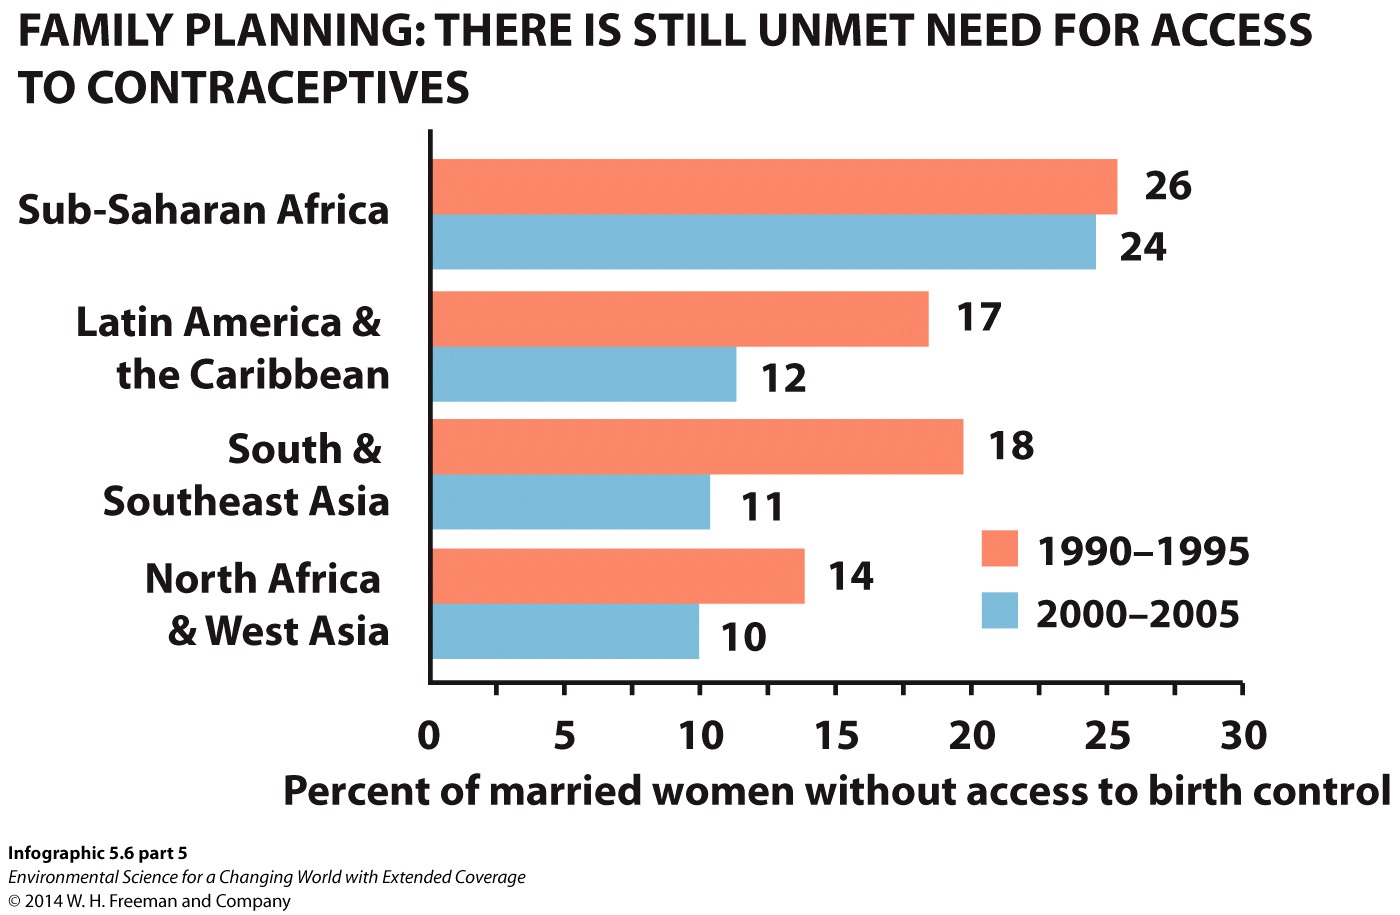 Infographic 5.6: As Education of Women Increases, TFR Decreases